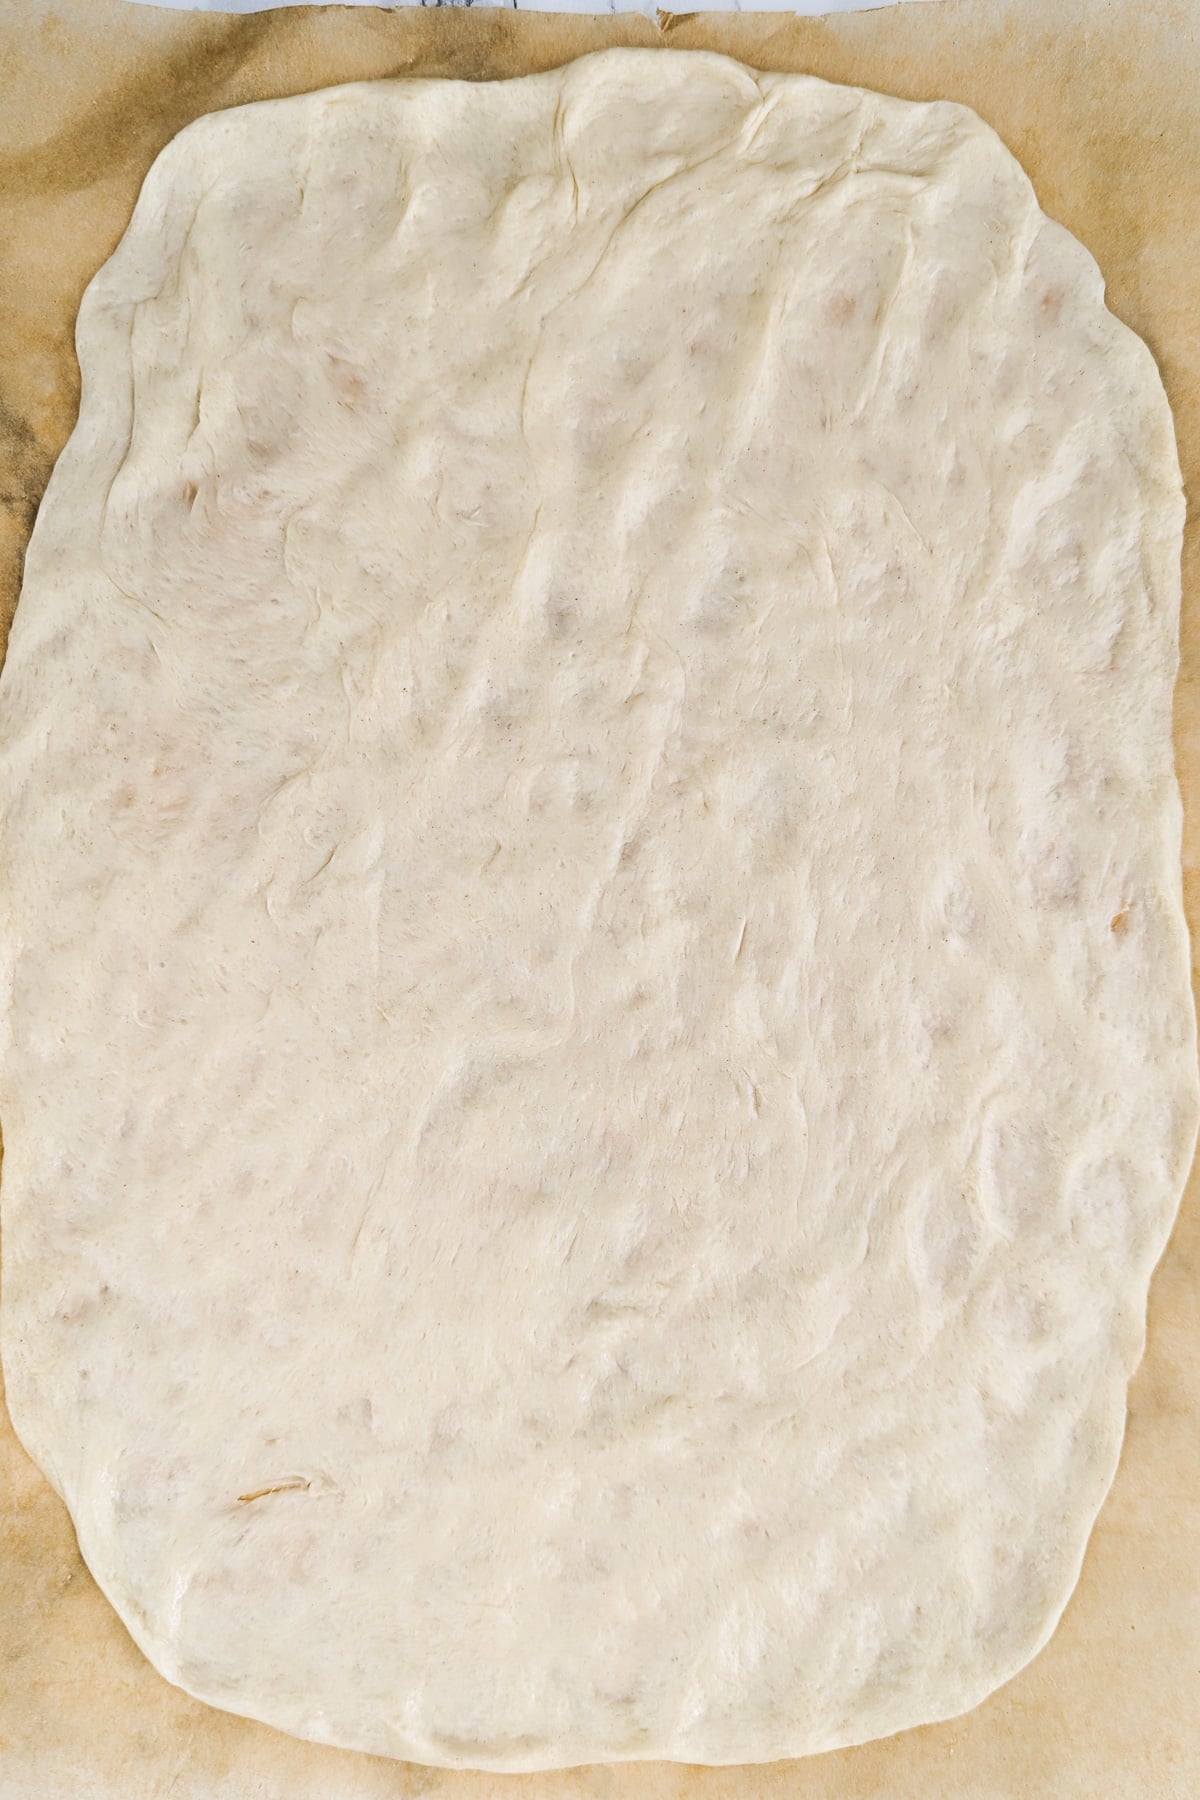 Top view of a dough layerd on a parchment baking paper.